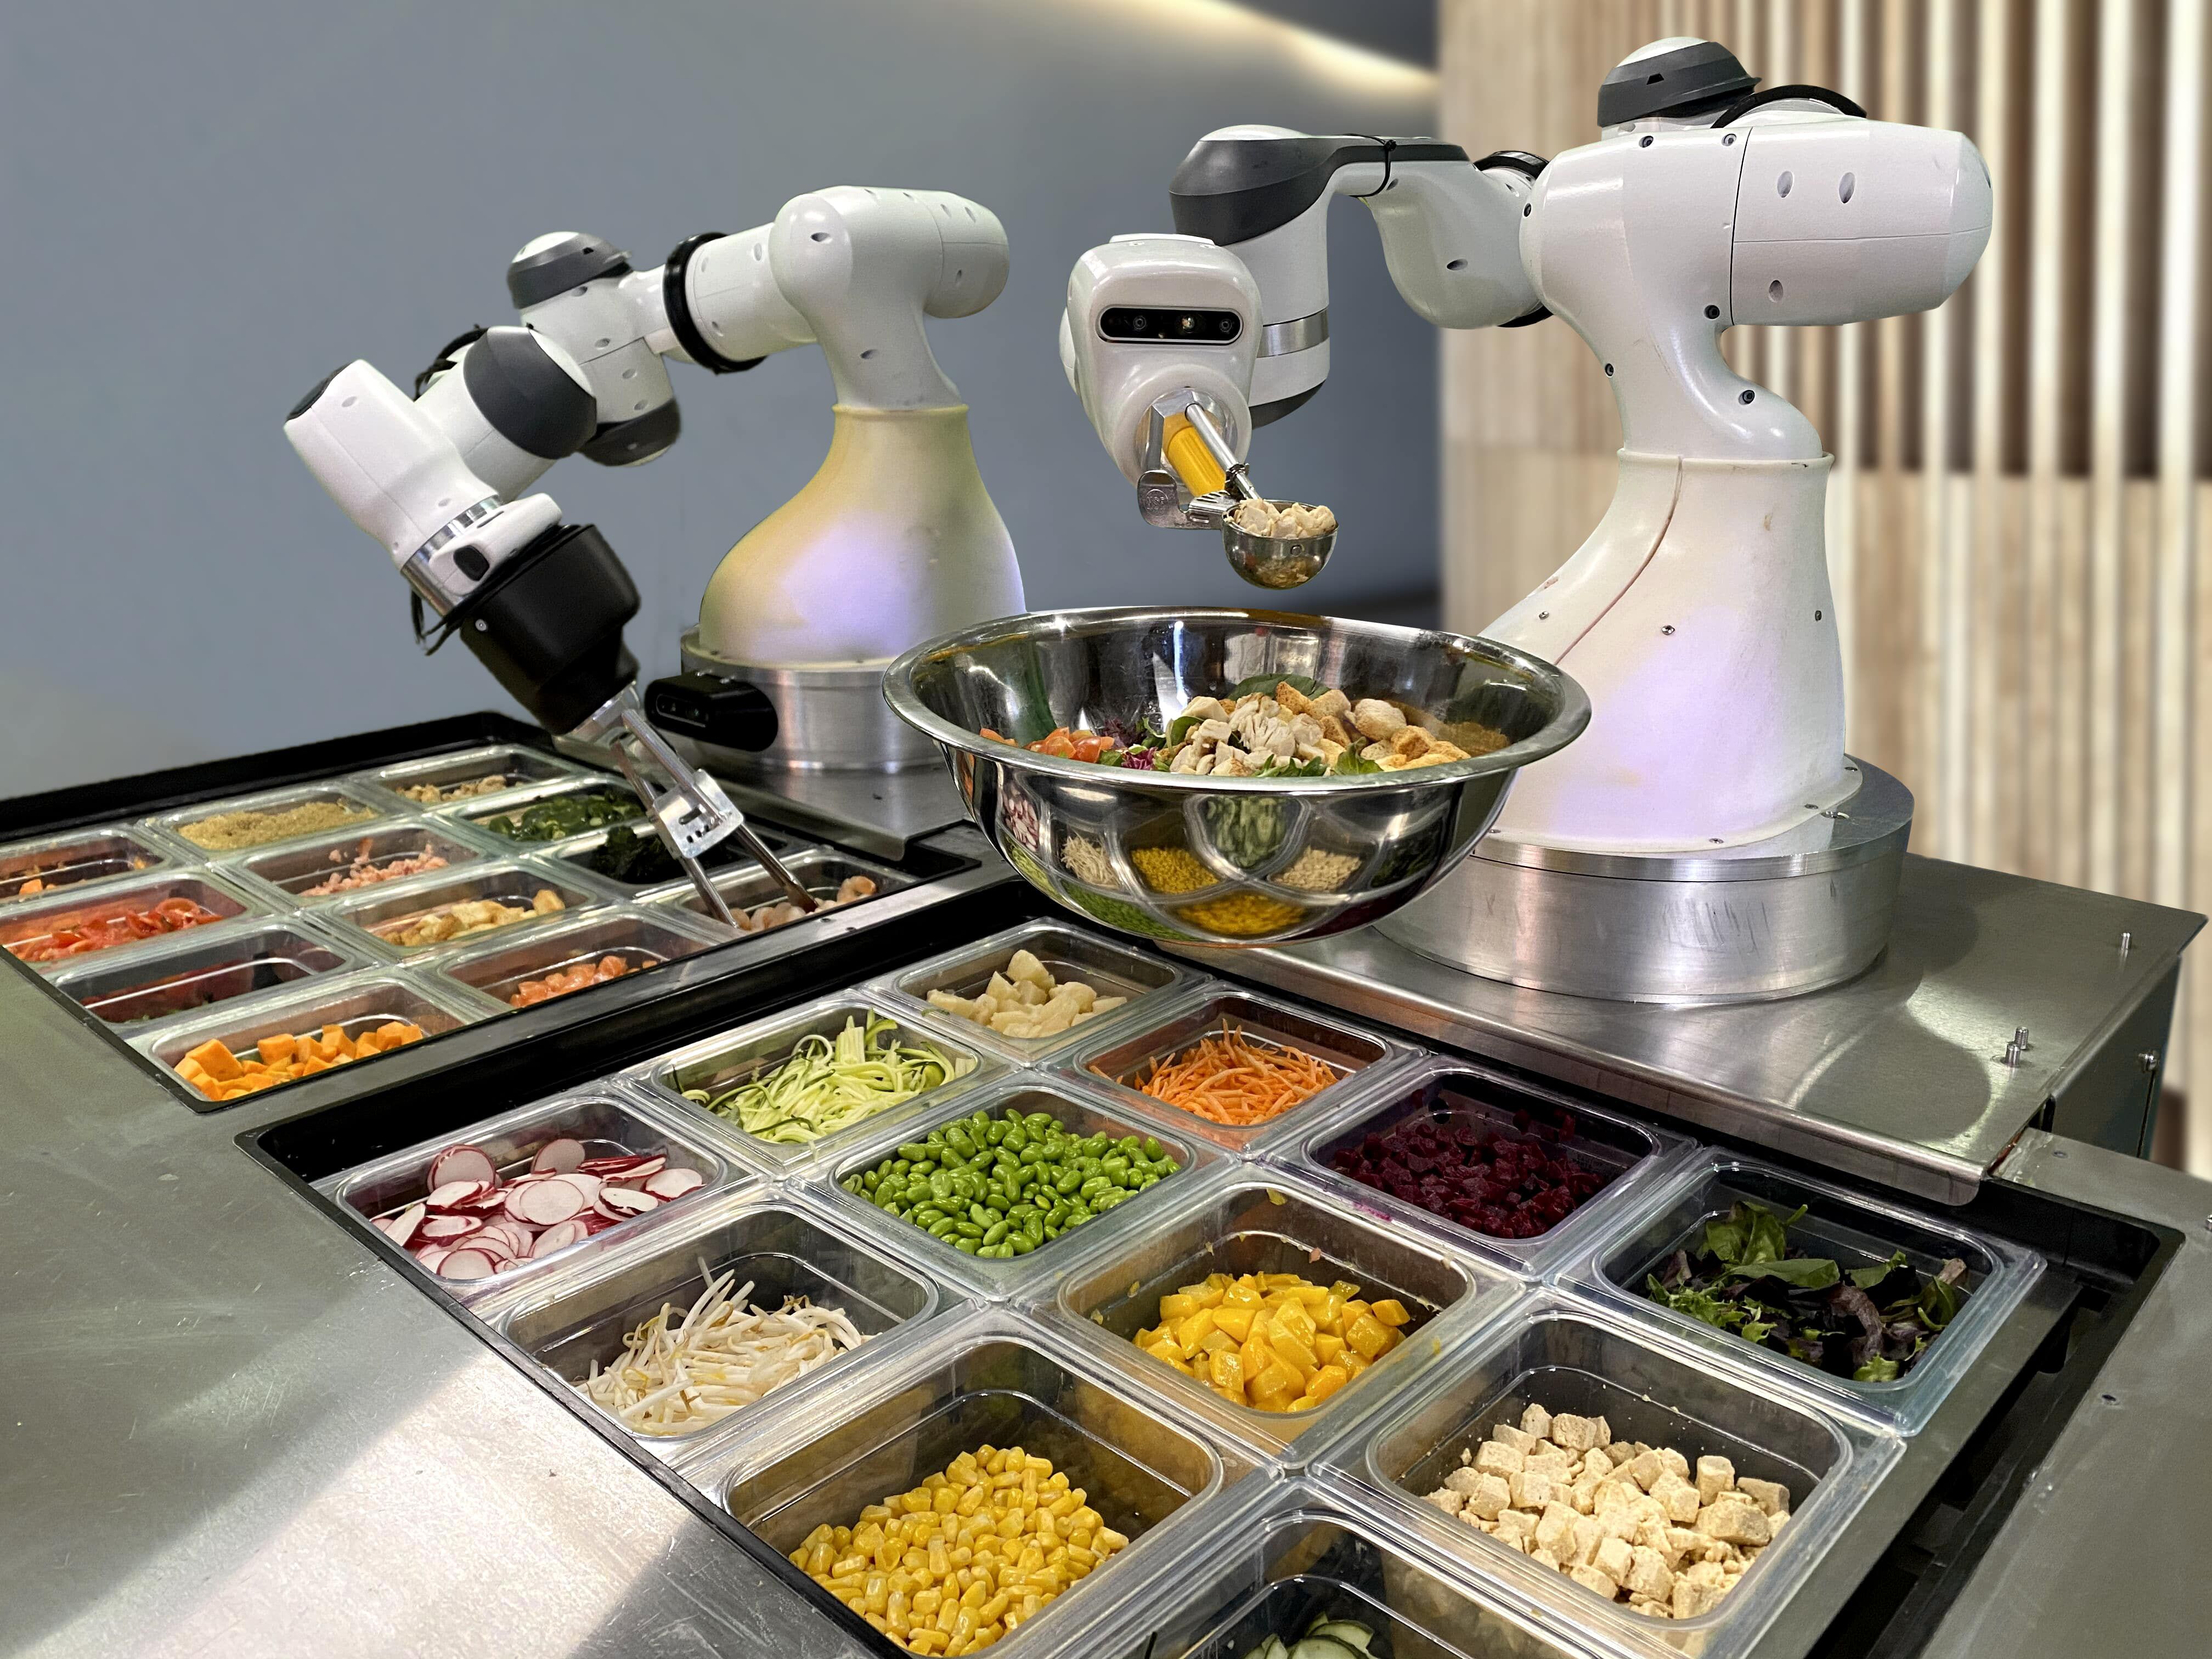 Robots in the kitchen are cooking up a storm